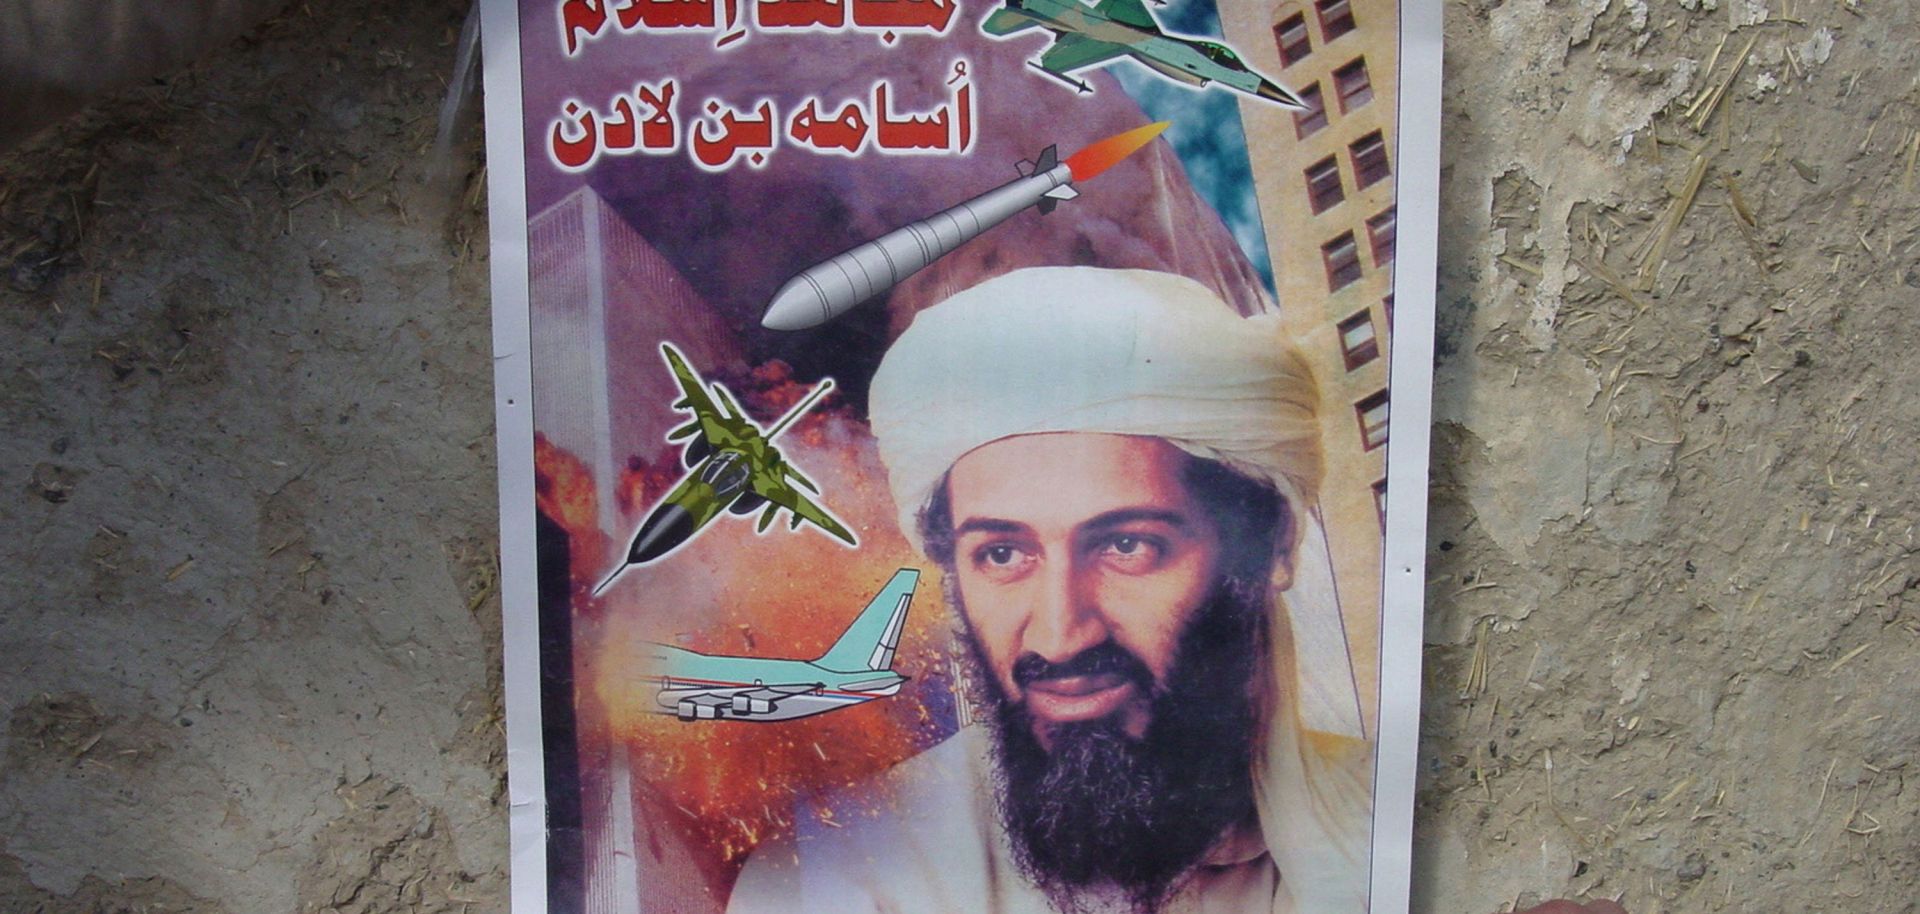 A poster found in an al Qaeda classroom shows Osama Bin Laden smiling and surrounded by military vehicles.